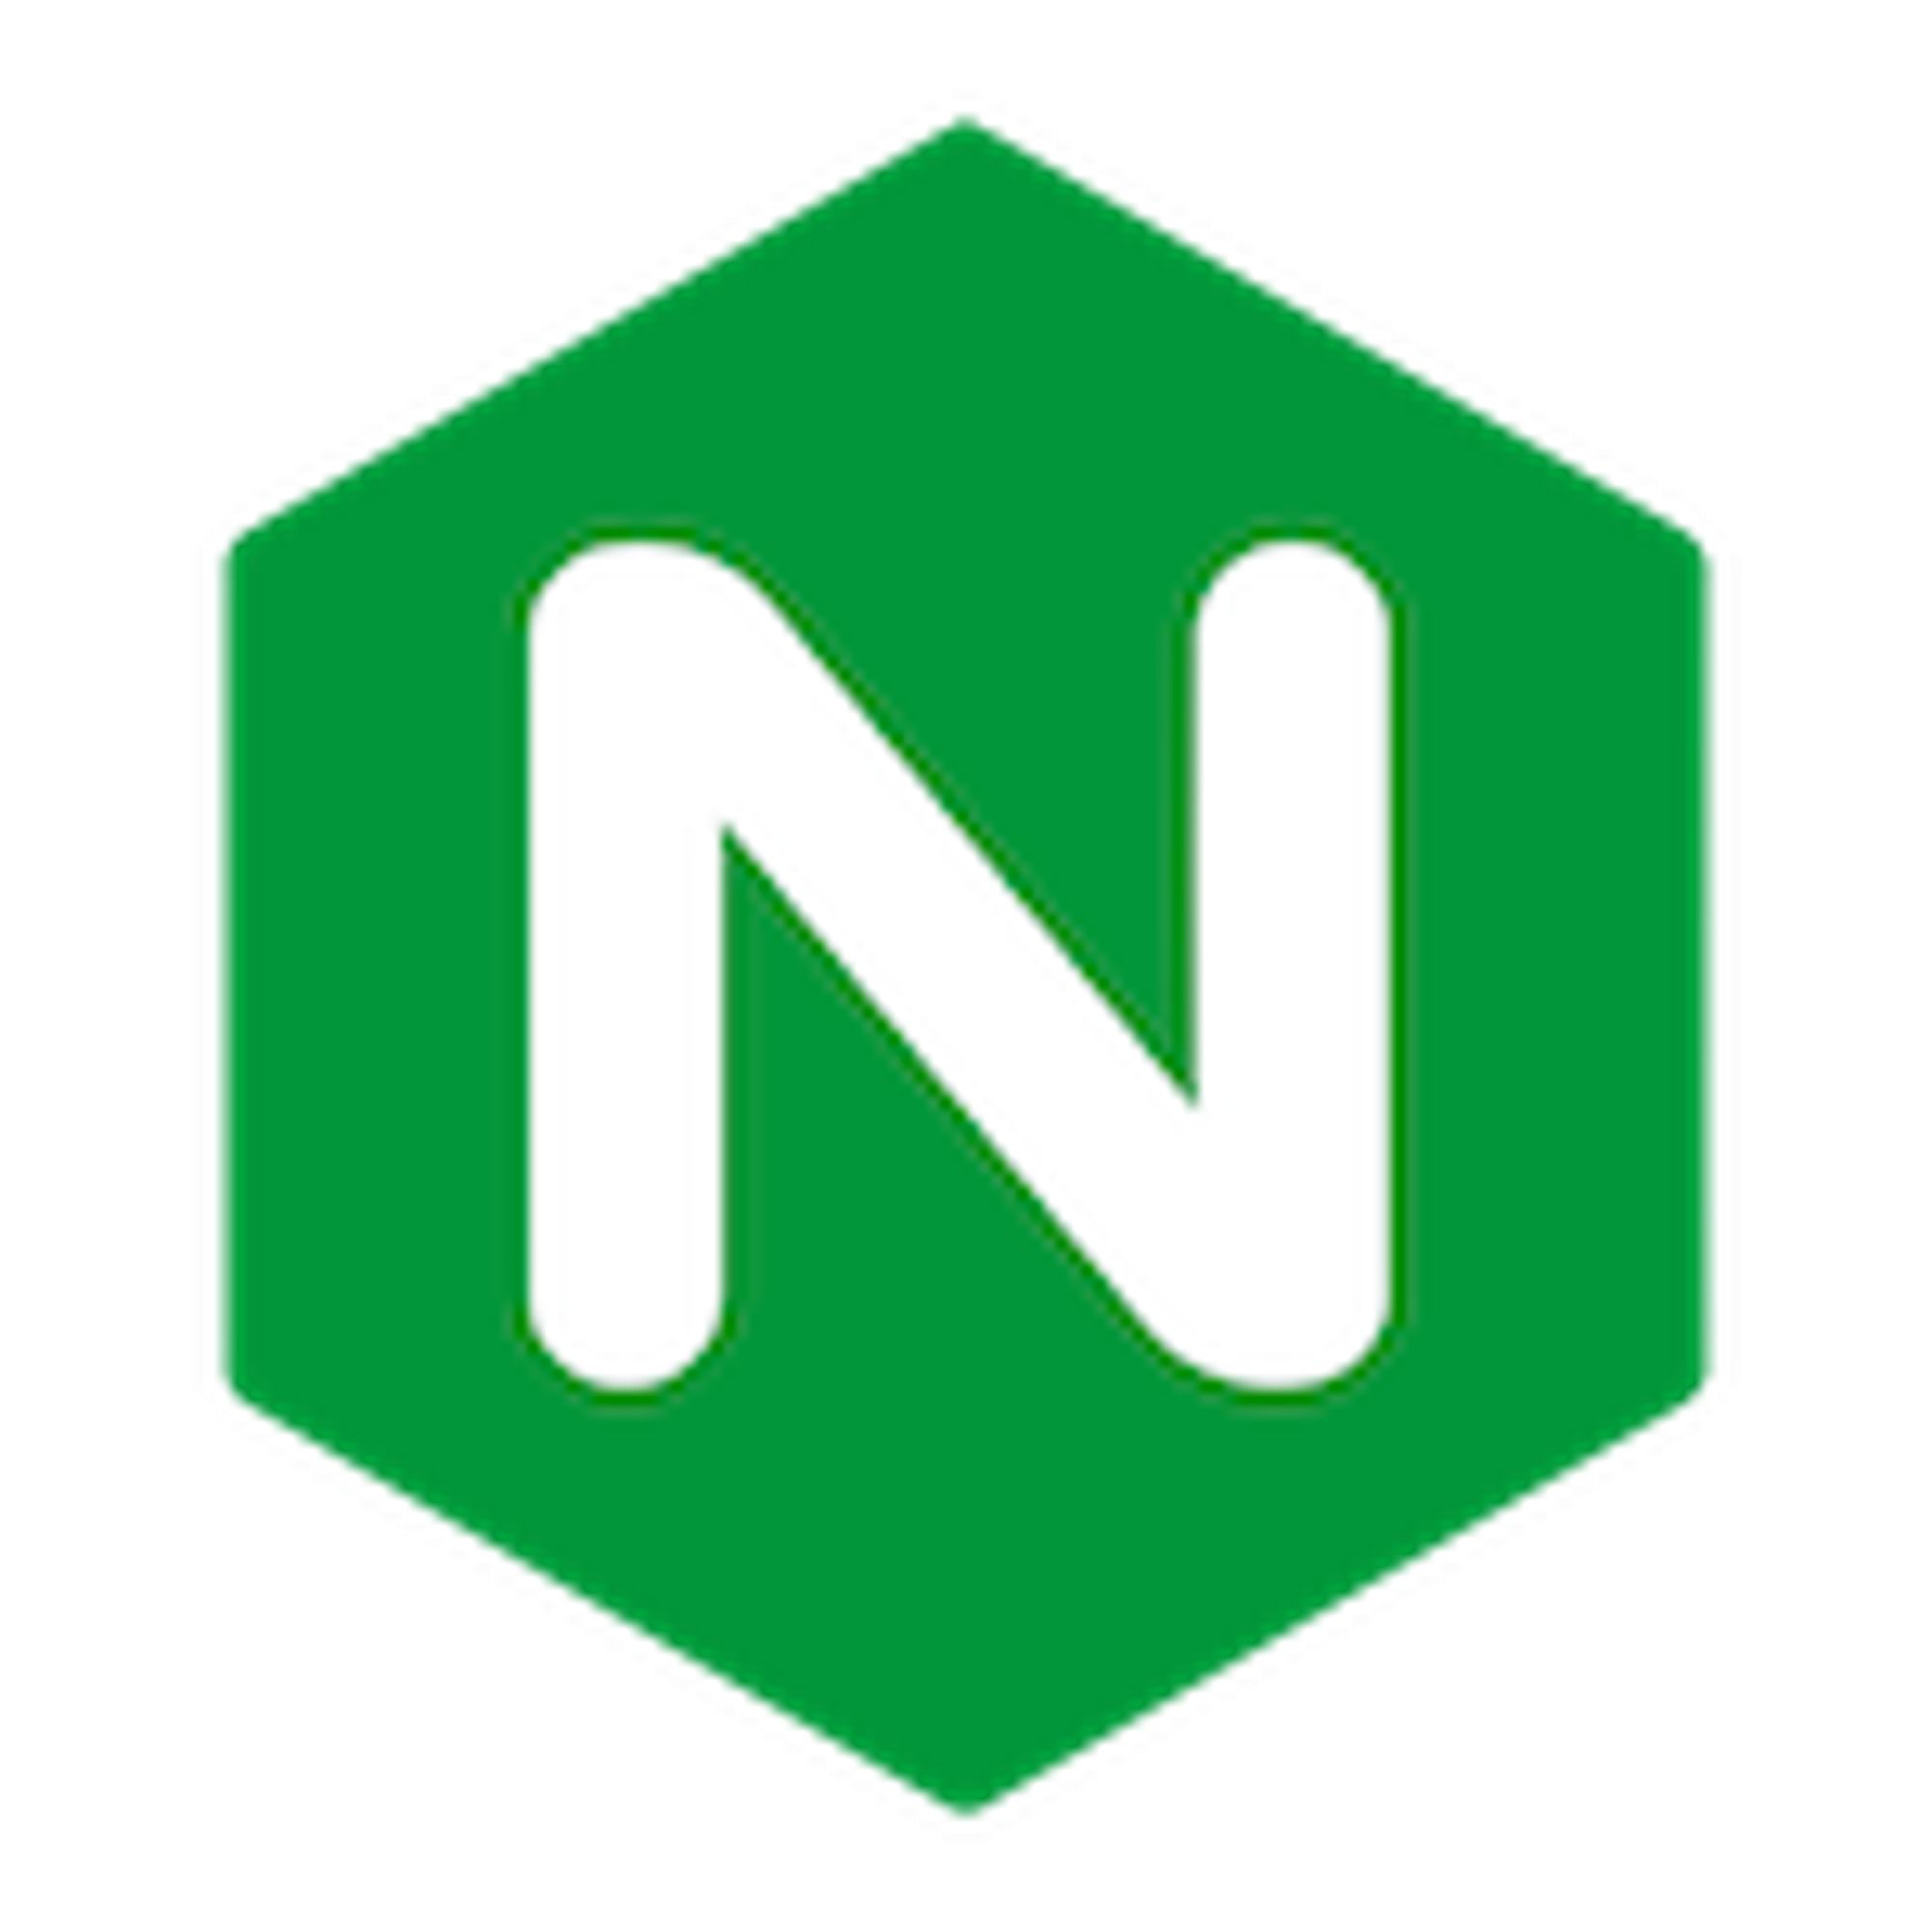 Install NGINX from source